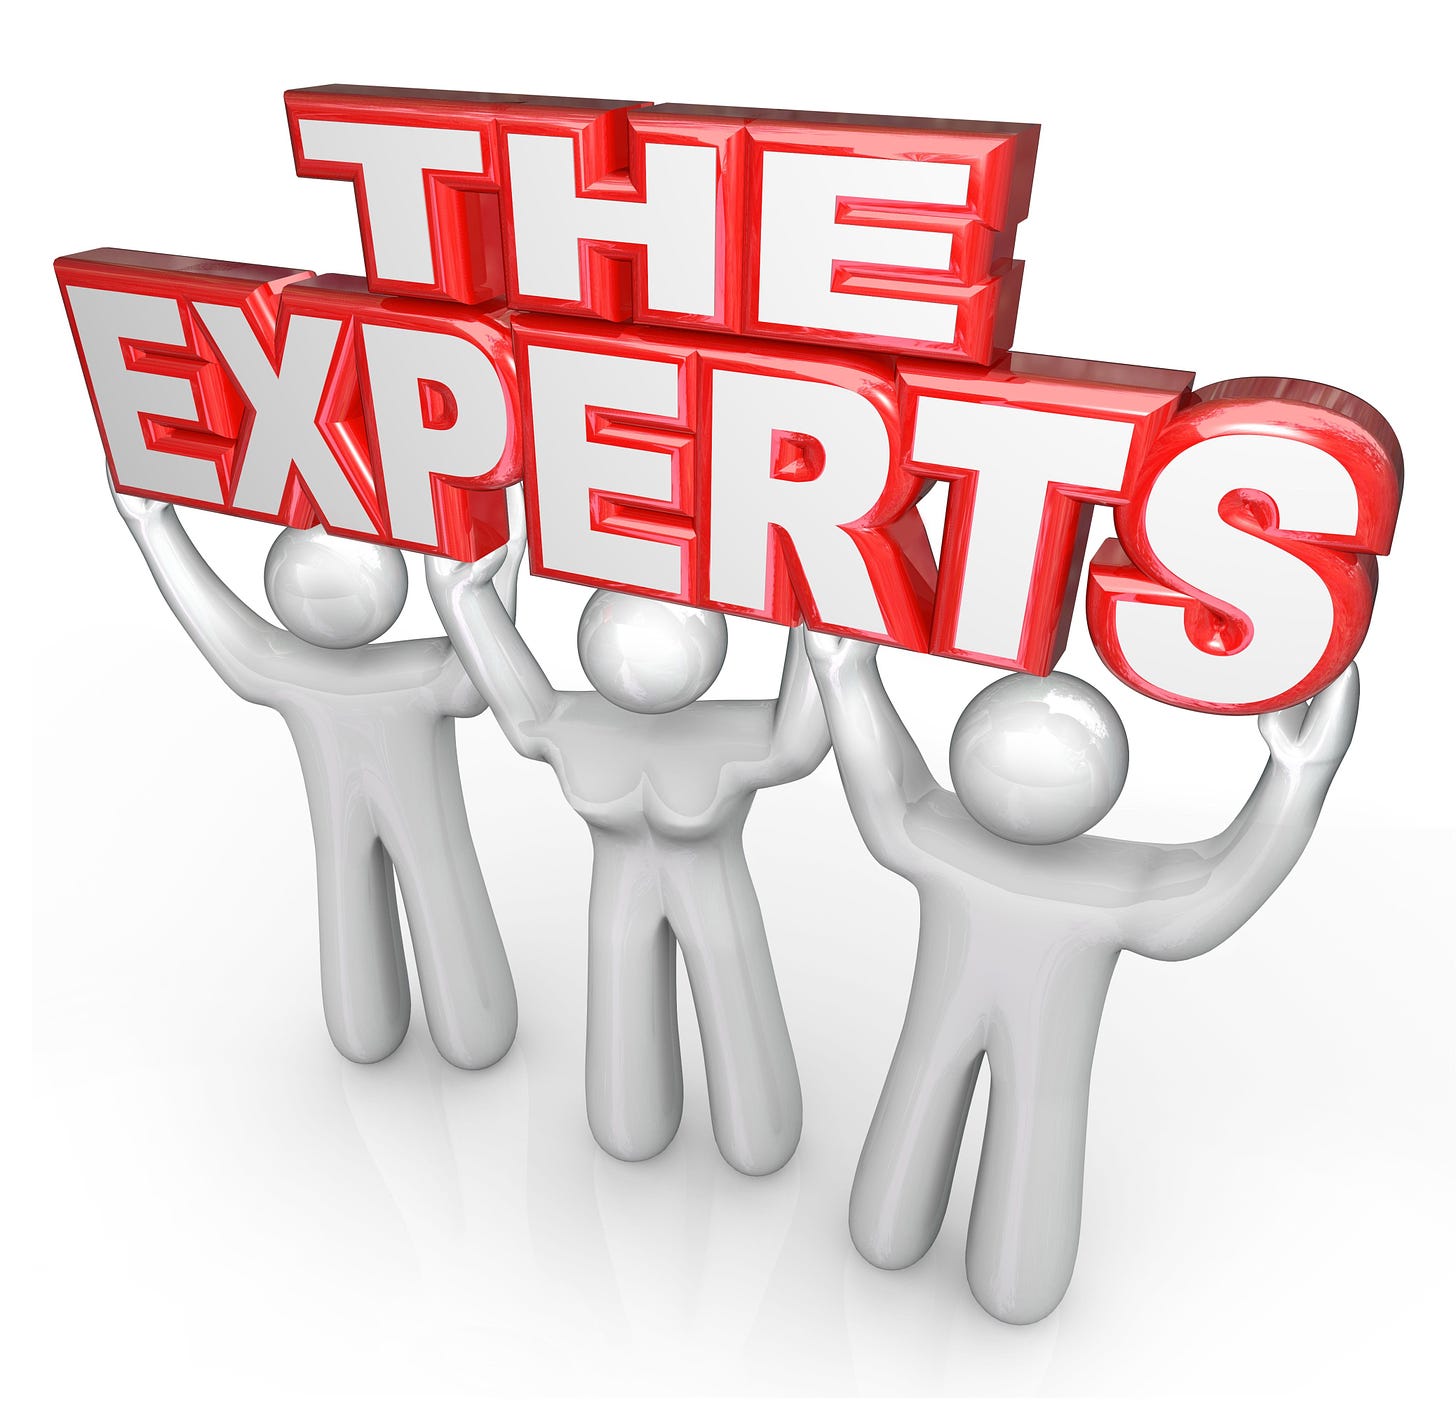 Experts for everything — Steemit